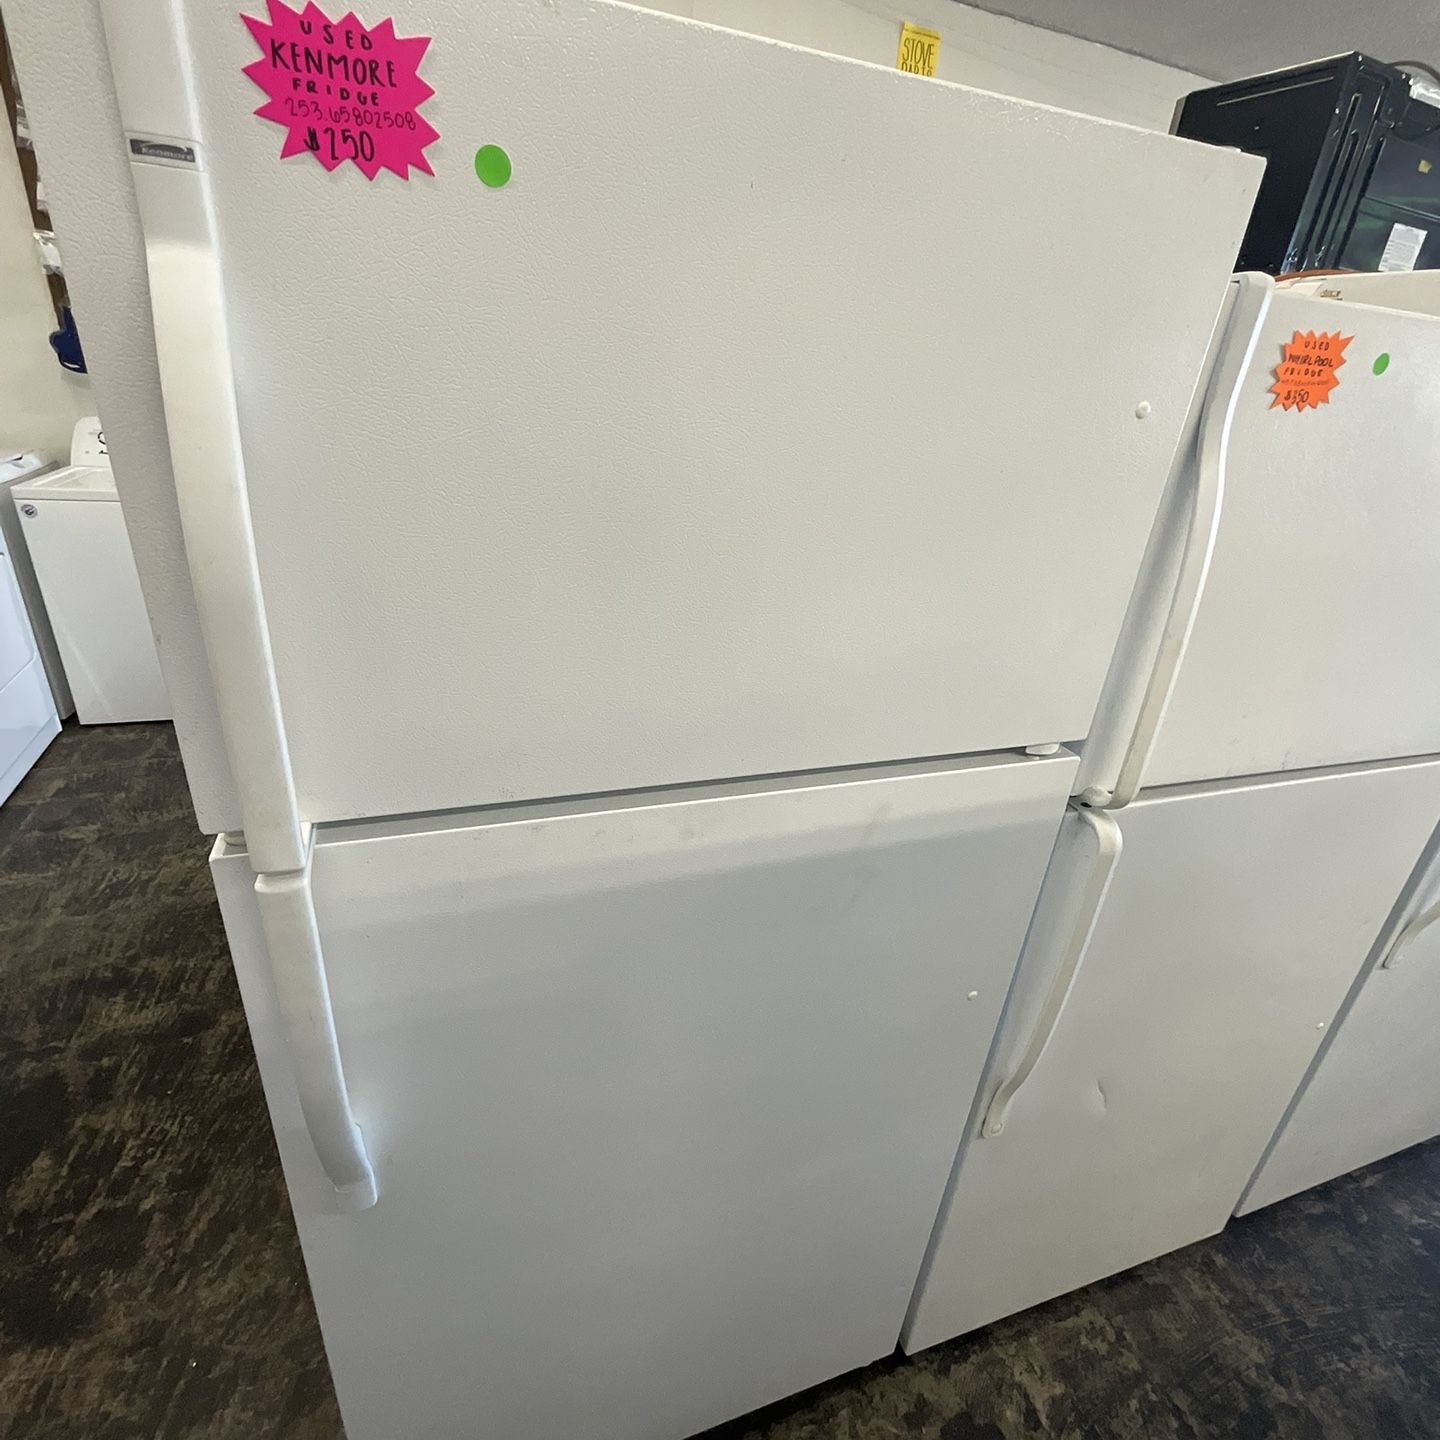 USED KENMORE FRIDGE: MANAGER’S SPECIAL!